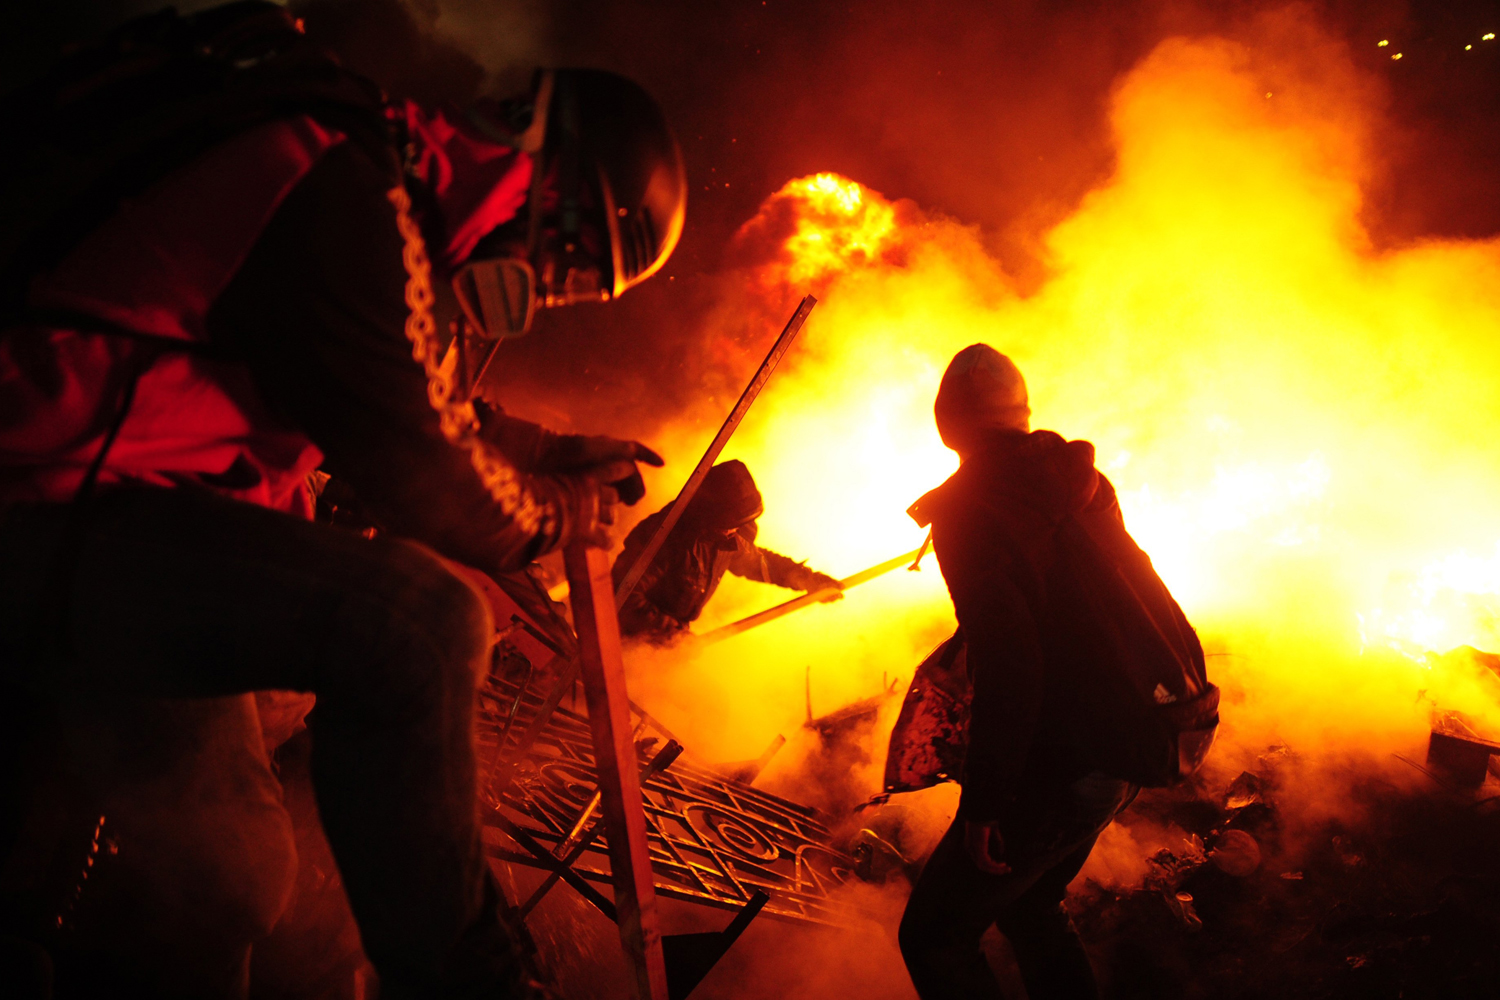 Anti-government protesters clash with police on Independence Square in Kiev on Feb. 19, 2014. (Alexander Koerner—Getty Images)